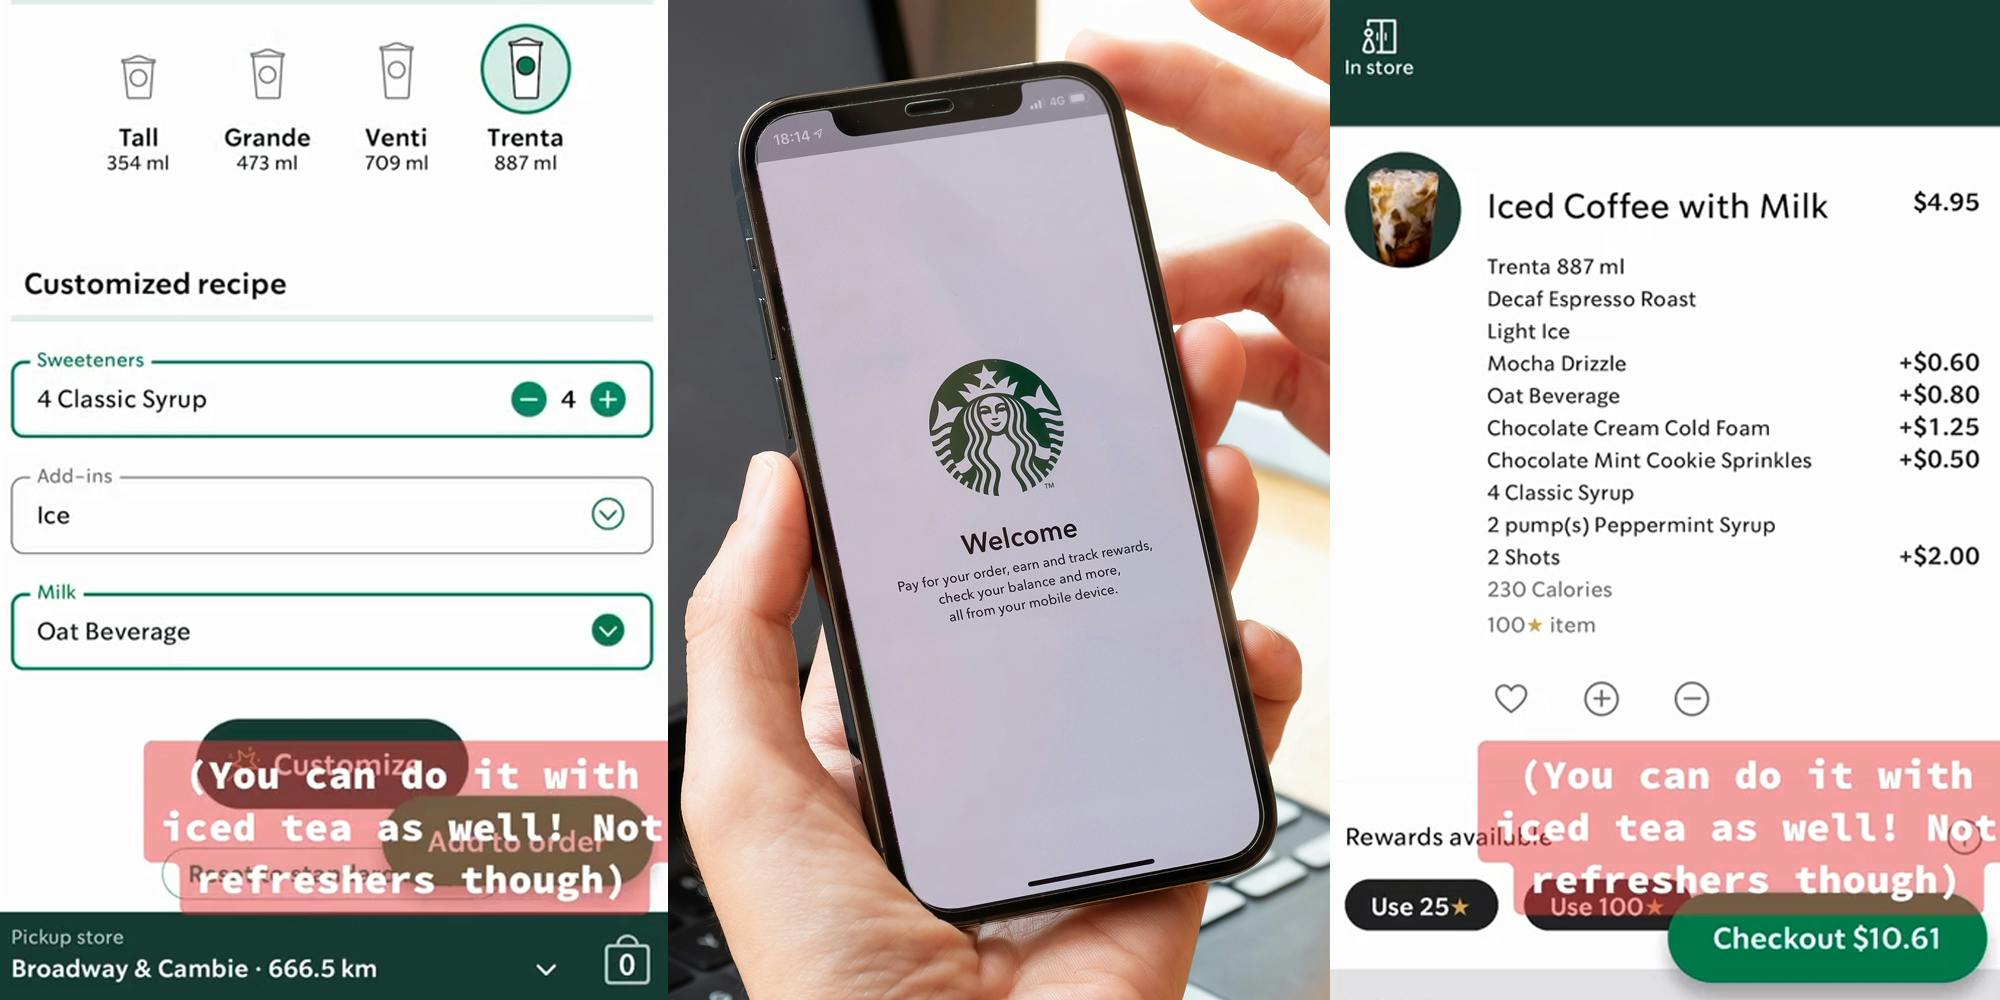 Starbucks app ordering screen with caption "(You can do it with iced tea as well! Not refreshers though)" (l) hand holding phone with Starbucks app open on screen (c) Starbucks app ordering screen with caption "(You can do it with iced tea as well! Not refreshers though)" (r)